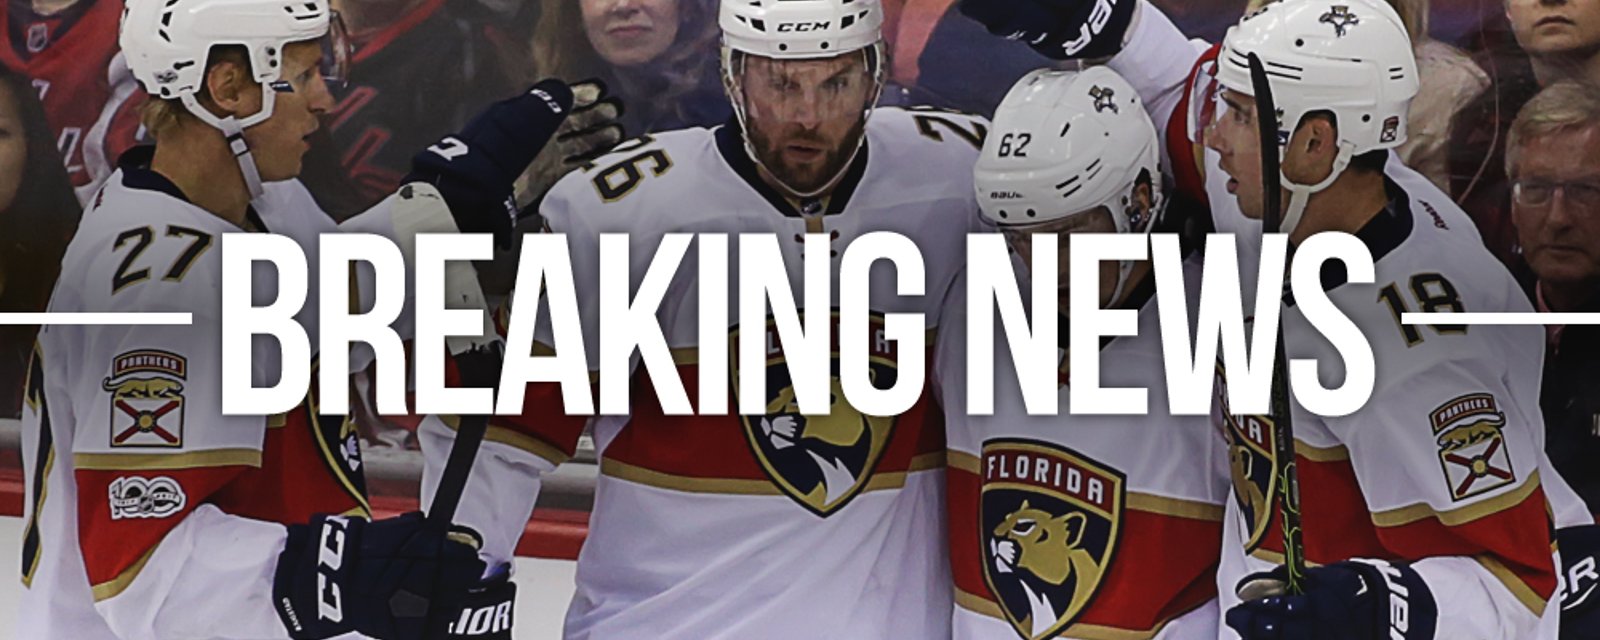 The Florida Panthers hire a former NHLer as their new head coach!